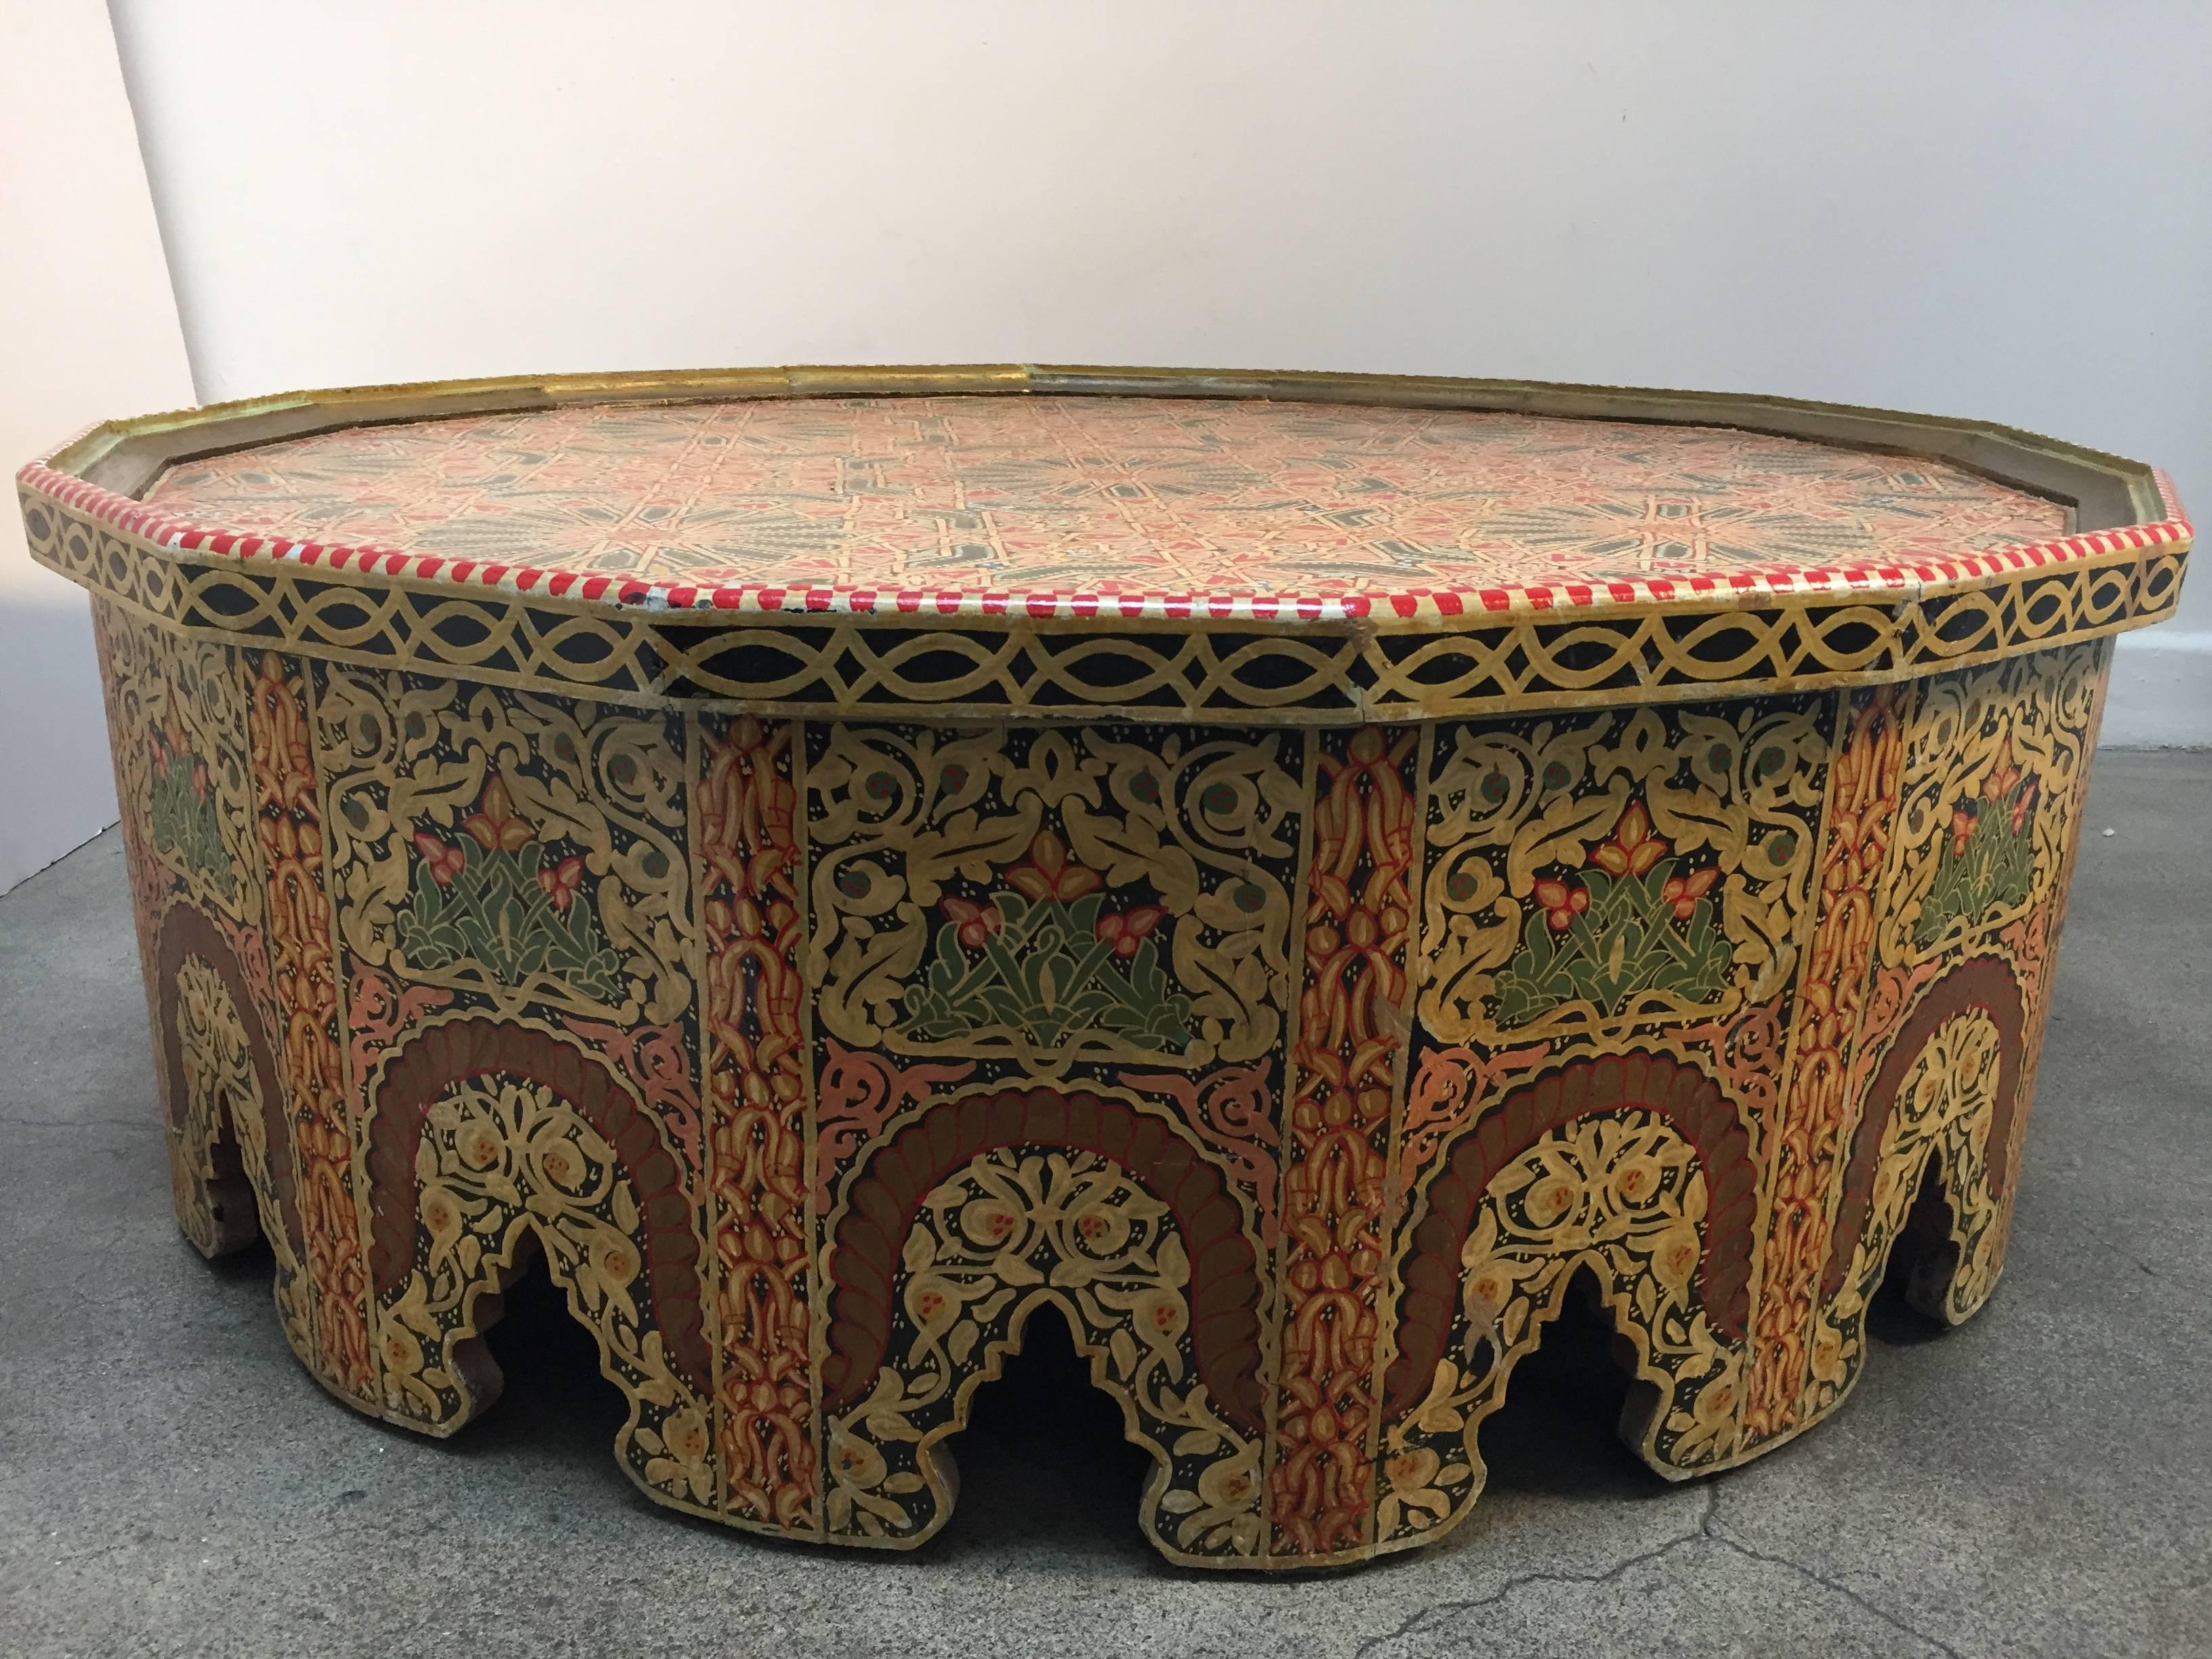 Handcrafted, hand-painted gorgeous Moroccan coffee or cocktail table. 
Polychrome with 16 sides with Moorish arches cut-out, intricate floral and geometric Fez design. 
Heavy custom-made Art and Craft table in polychrome colors, yellow, vanilla,